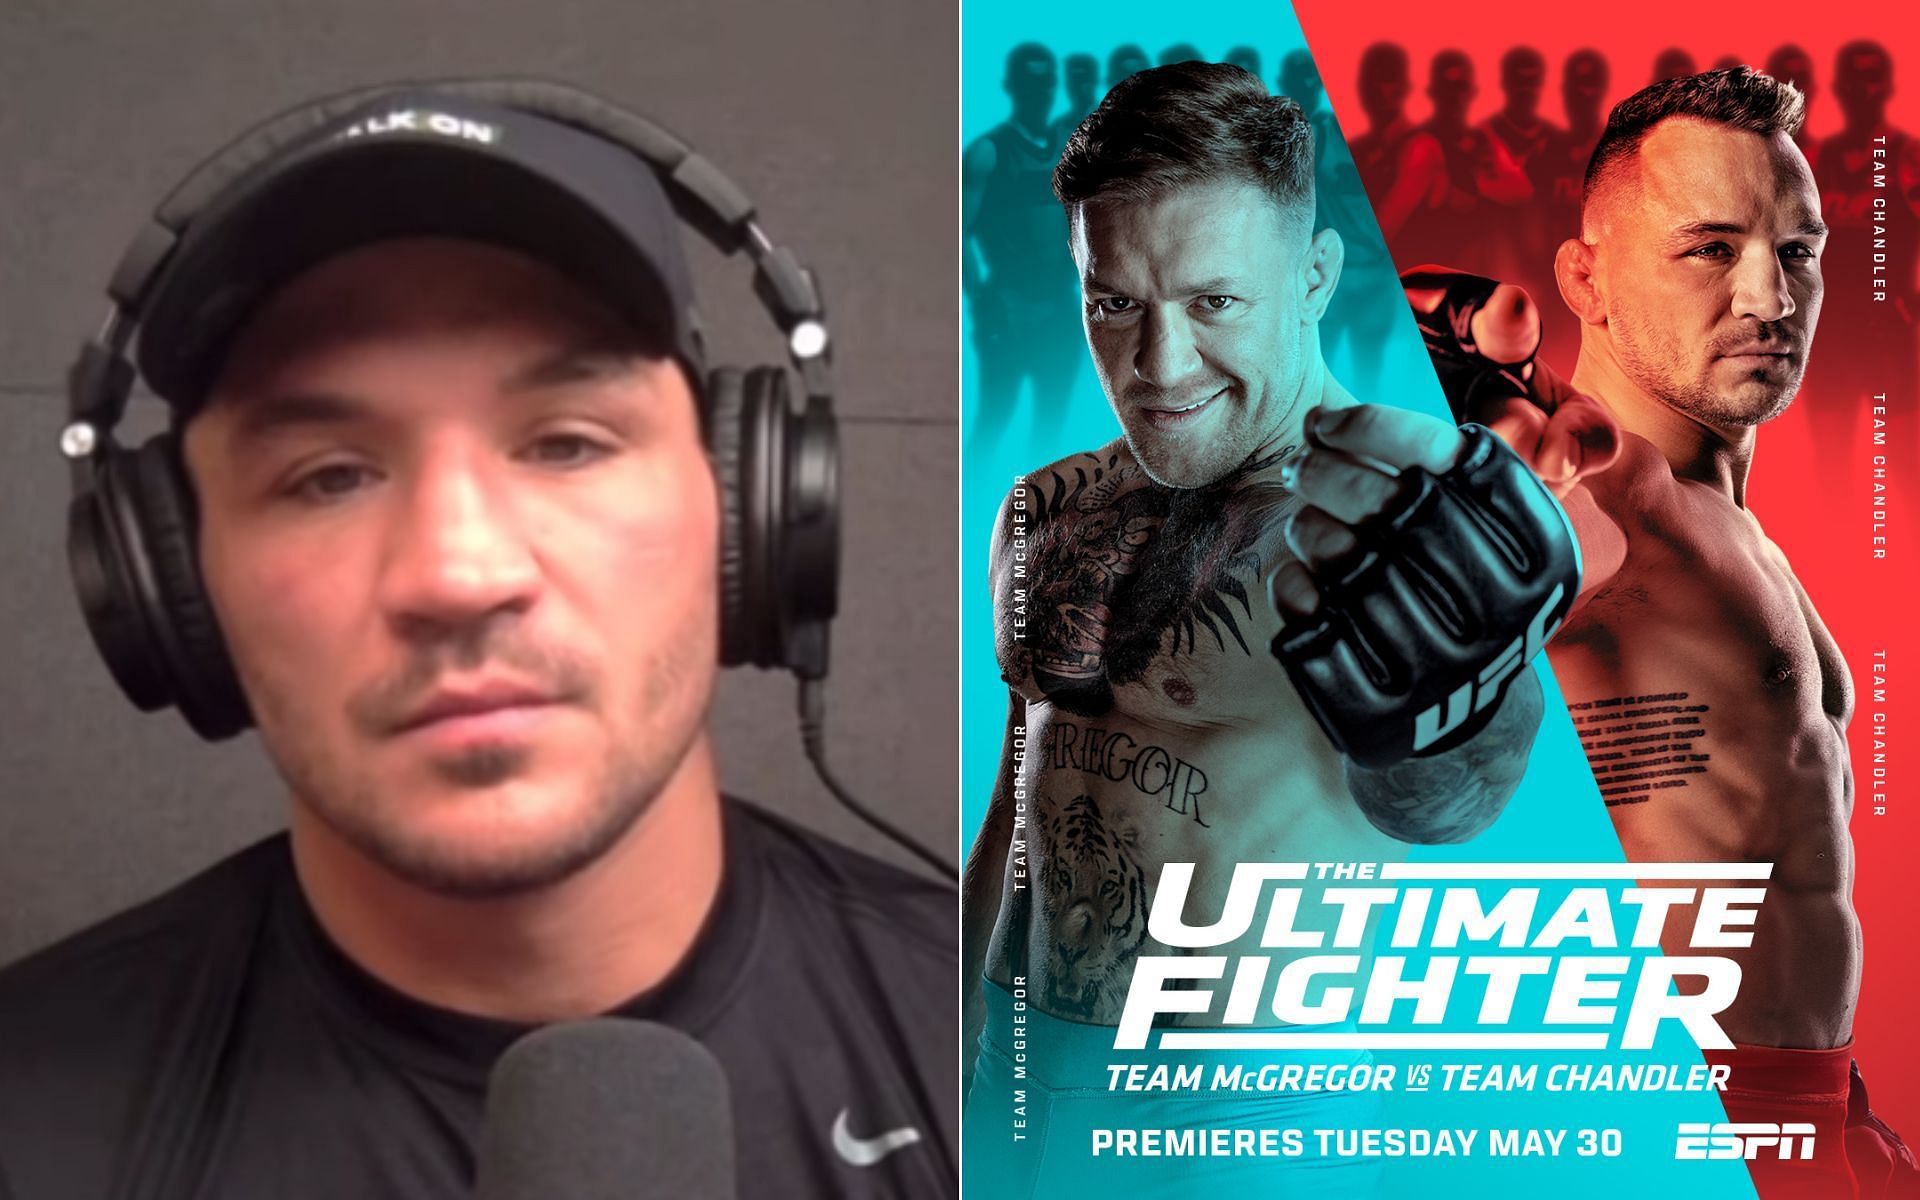 Michael Chandler [Left], and The Ultimate Fighter poster [Right] [Photo credit: @UltimateFighter - Twitter]